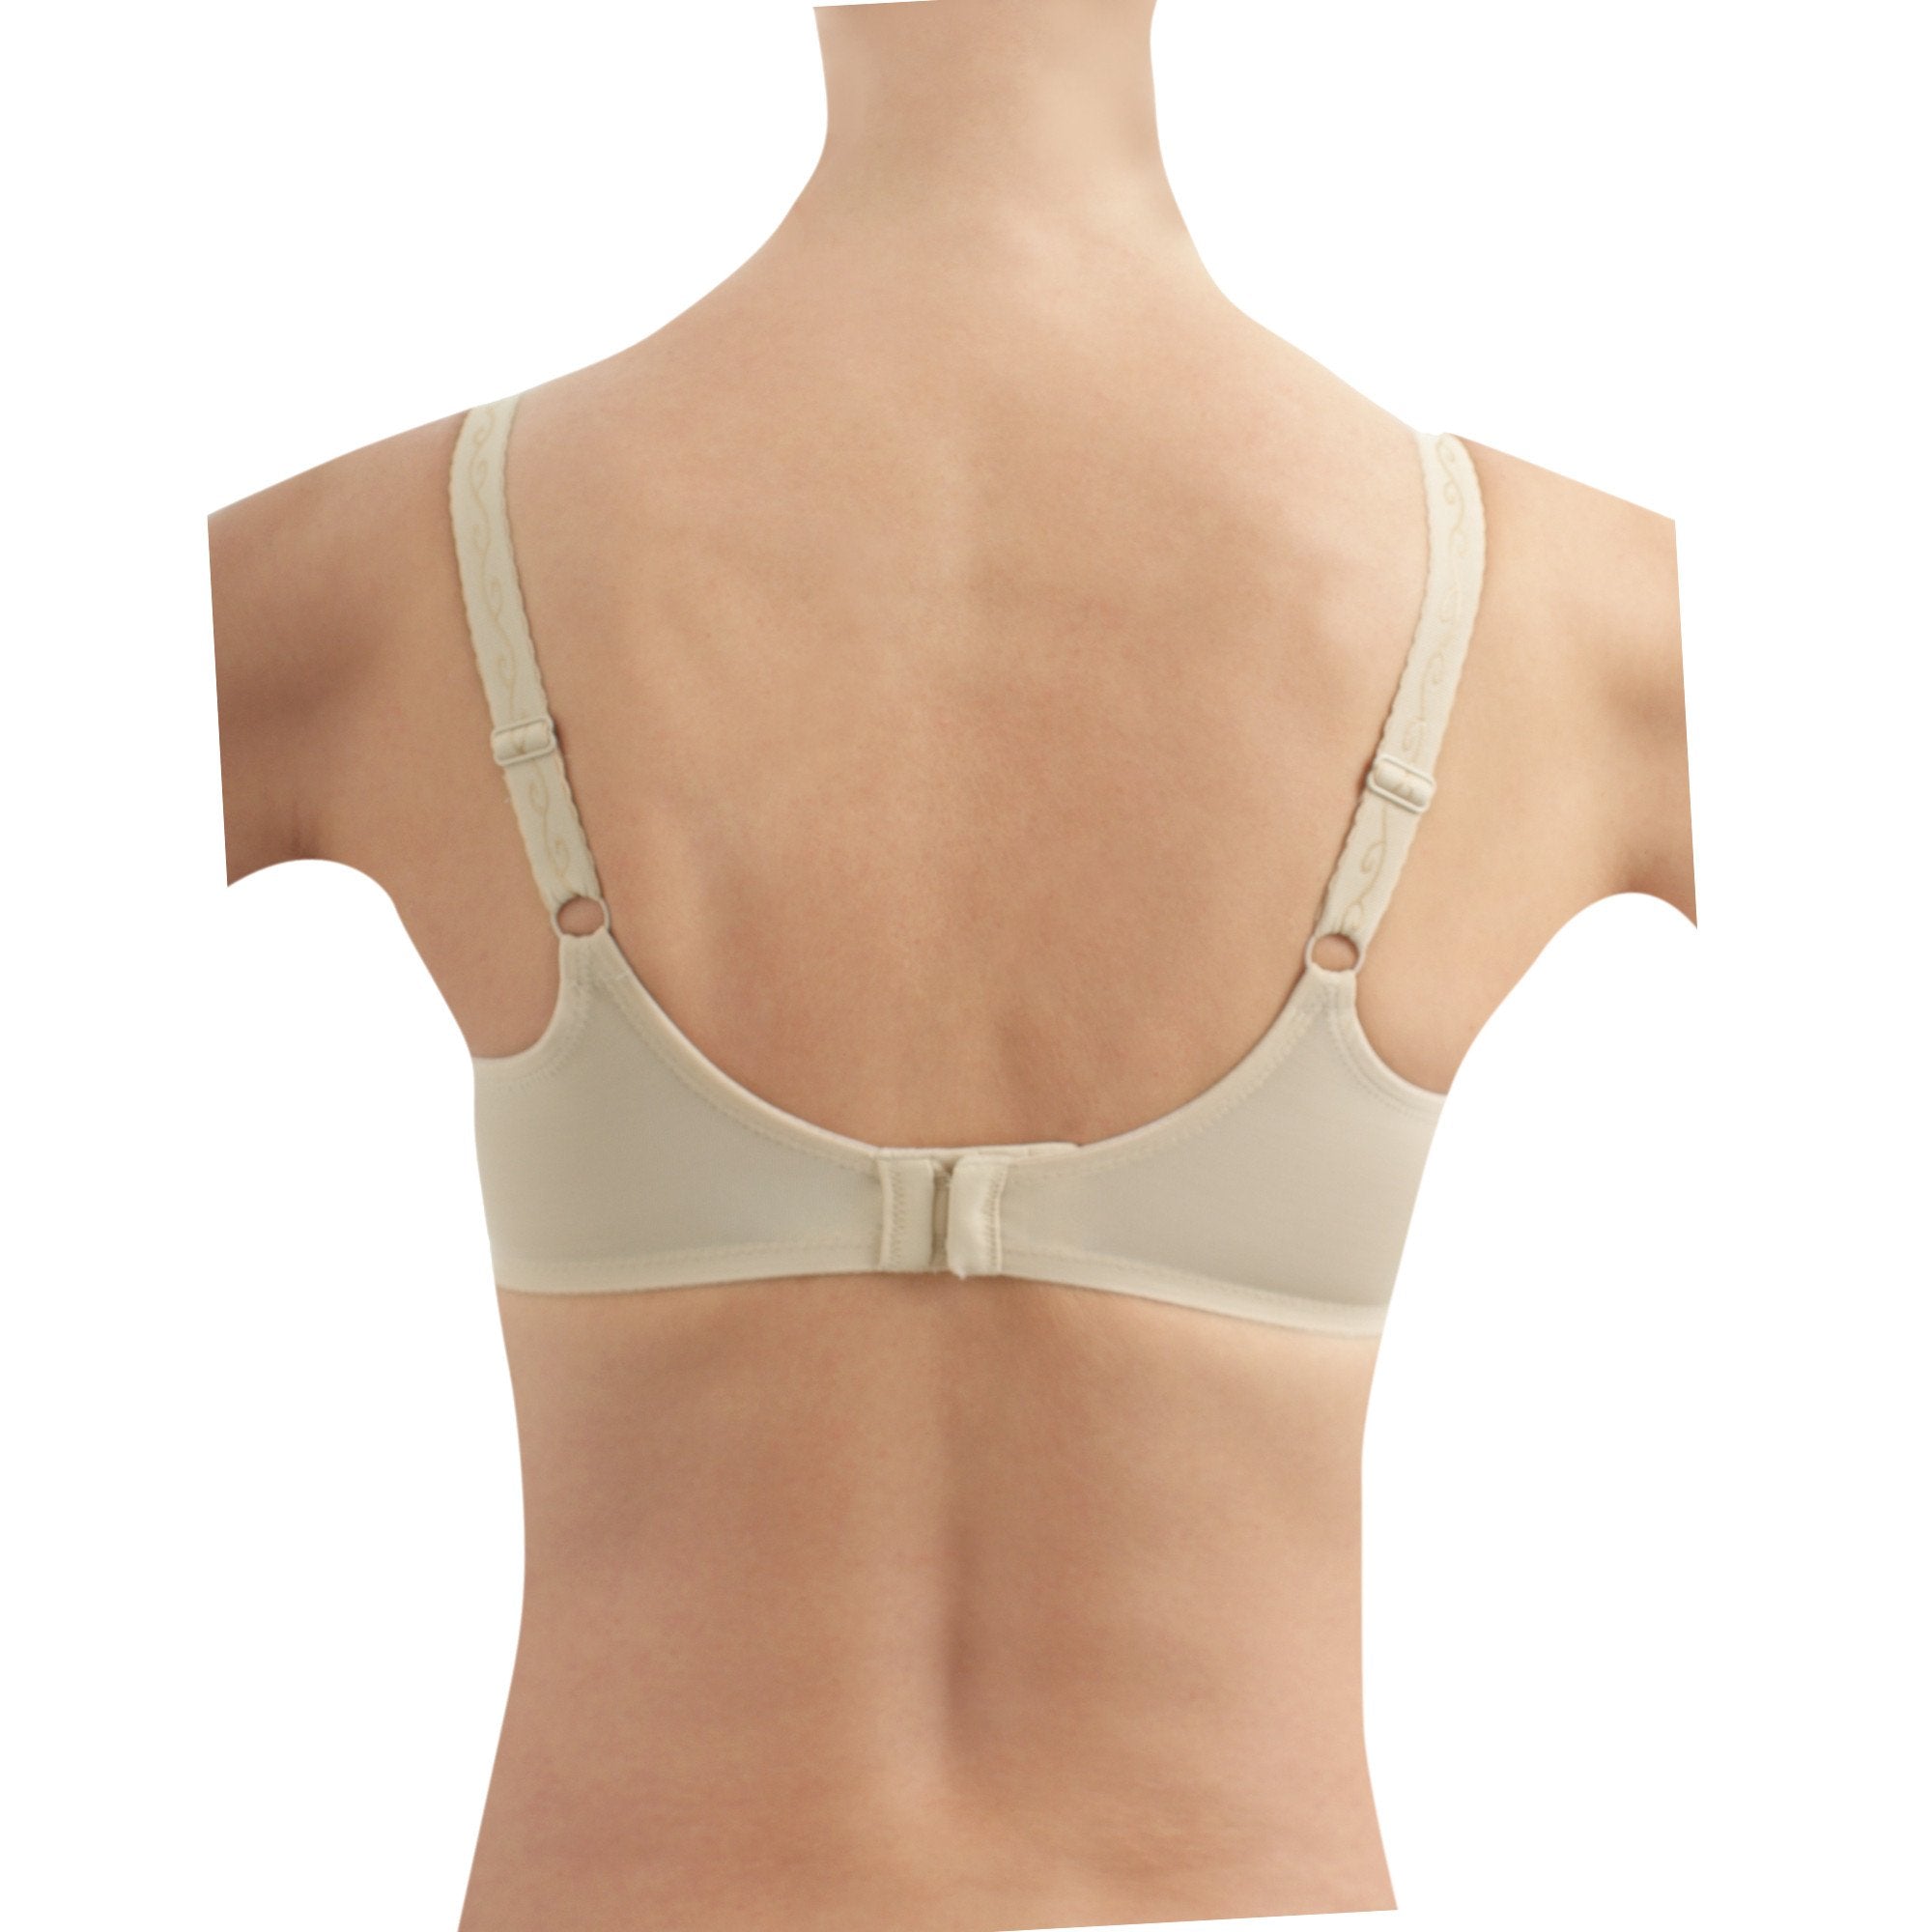 WACOAL SIMPLE SHAPING Minimiser Bra 857109 Womens Underwired Full Cup Bras  £35.00 - PicClick UK